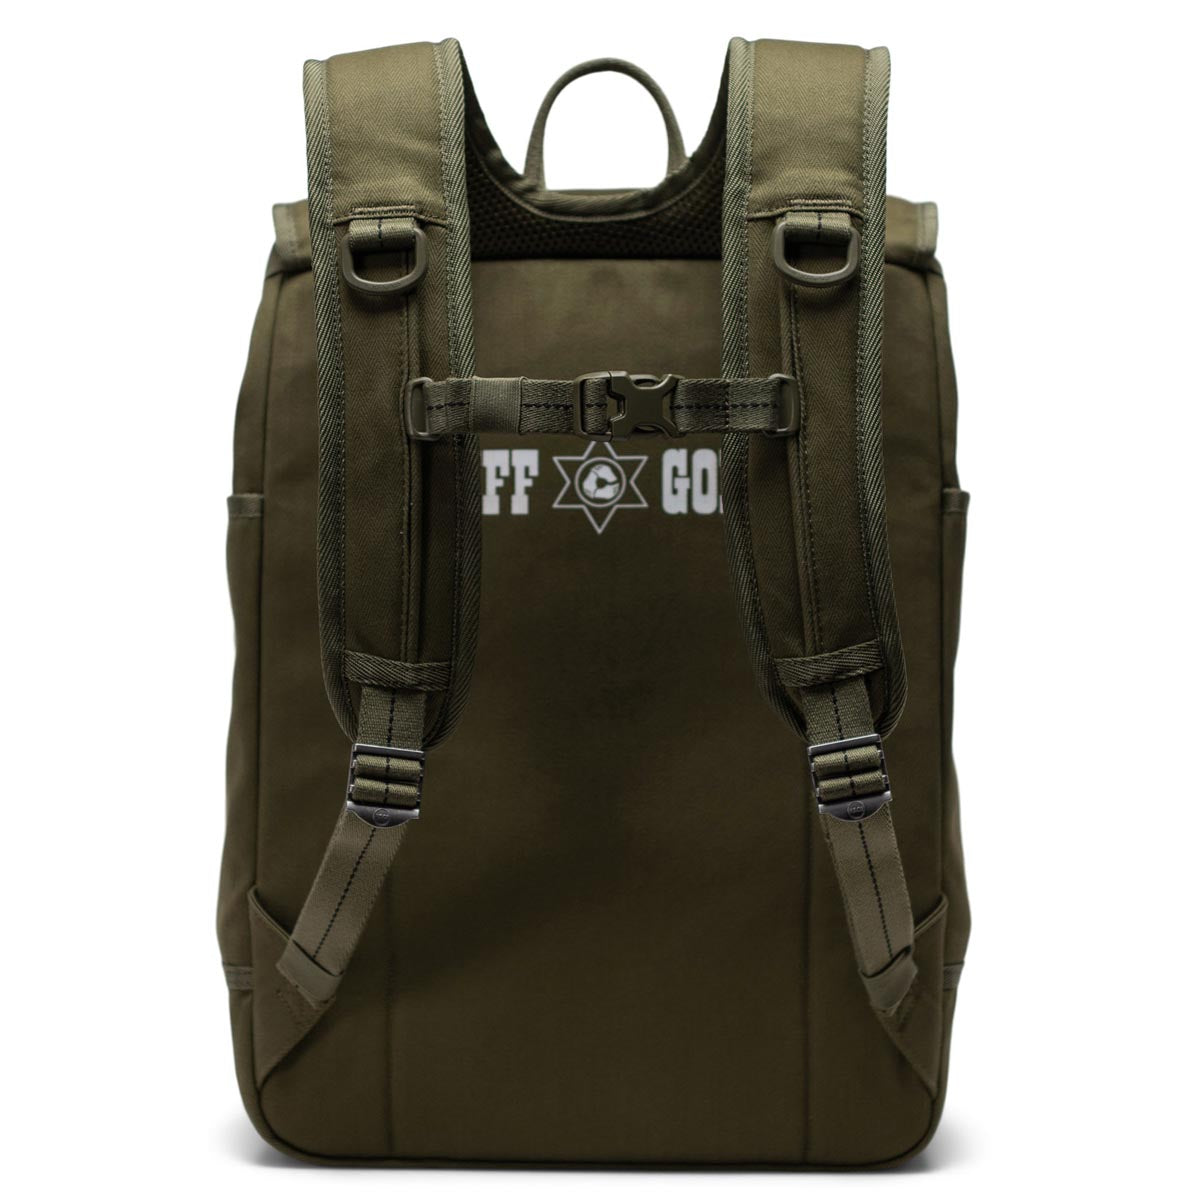 Herschel Supply Purcell Backpack - Ivy Green image 4